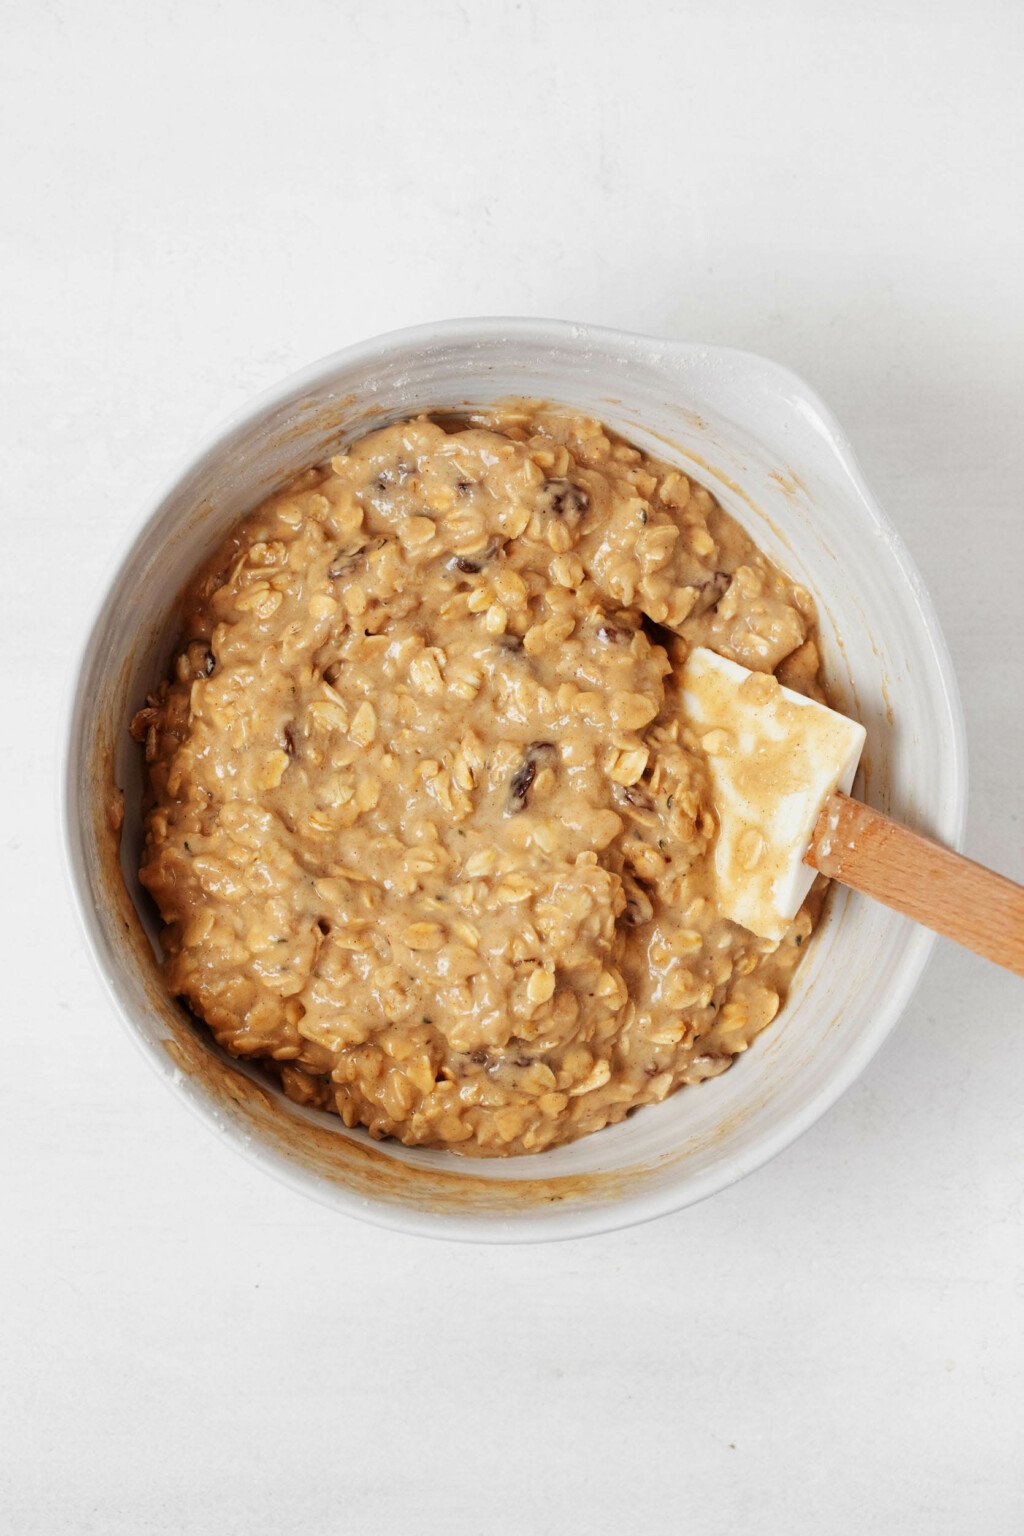 The batter for something is being mixed in a white bowl, with a spatula. It rests on a white surface.